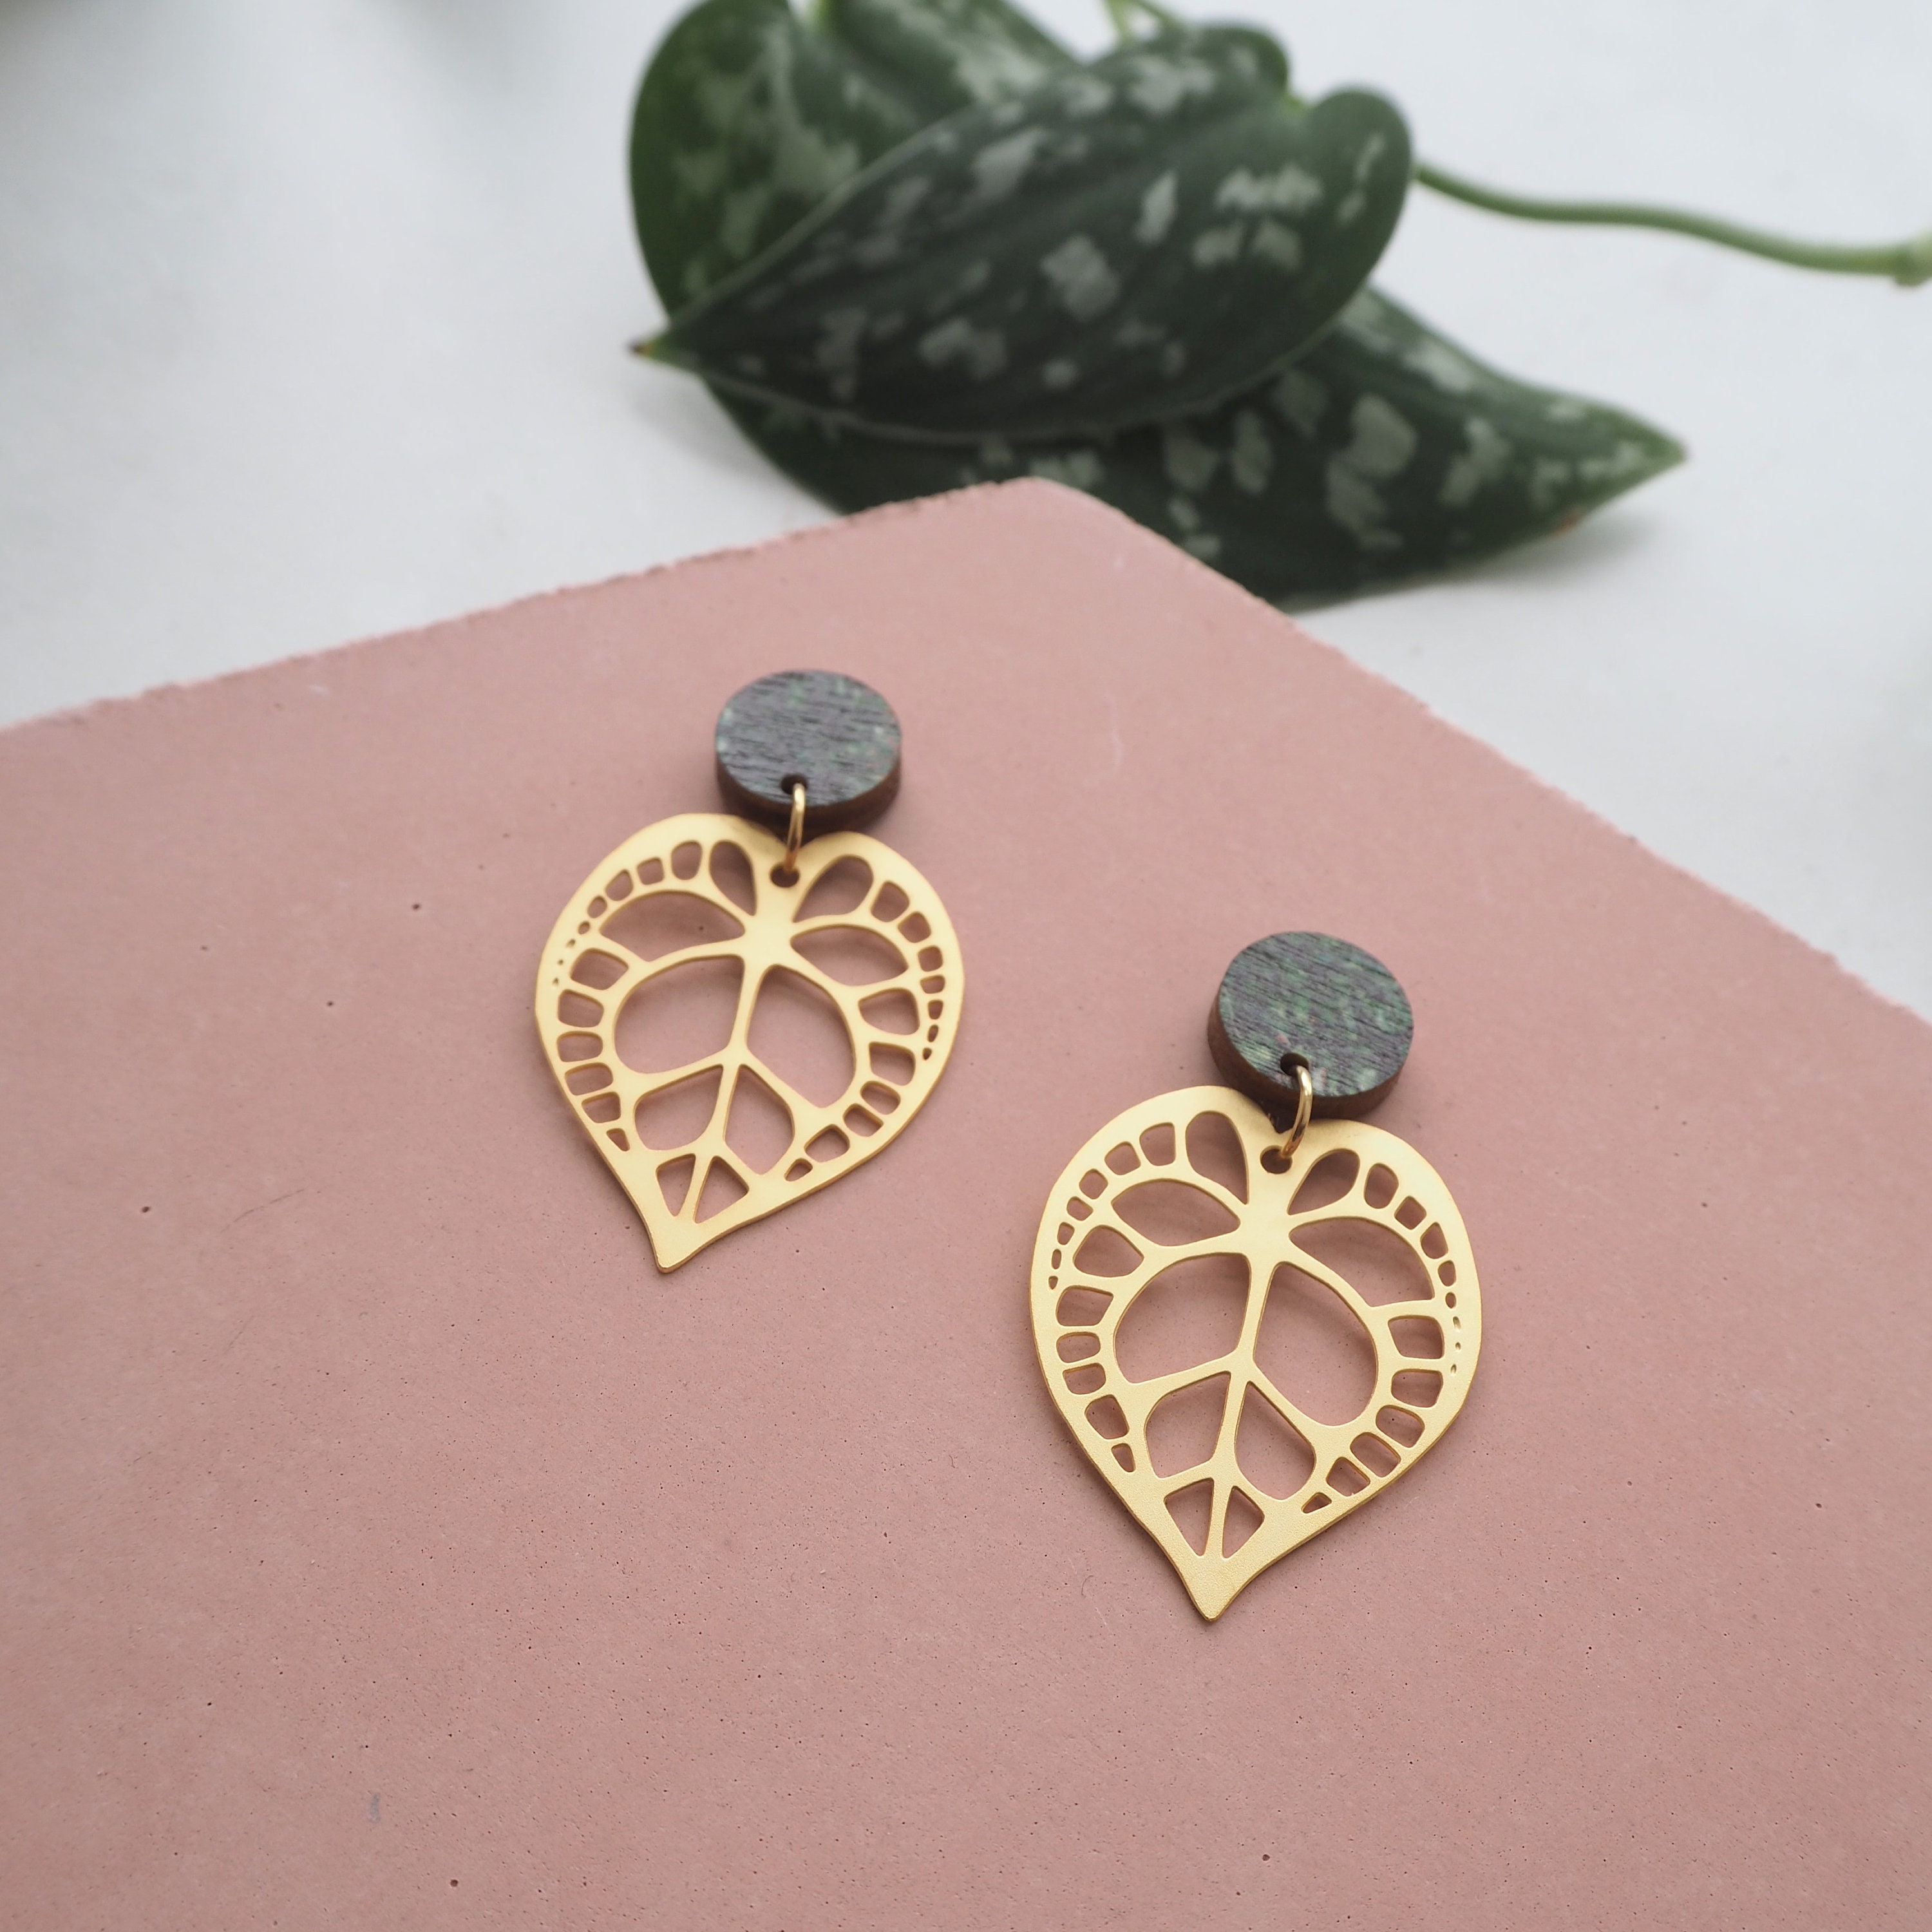 Statement Anthurium Drop Earrings - Gold Leaf Stud Plant Gift For Her